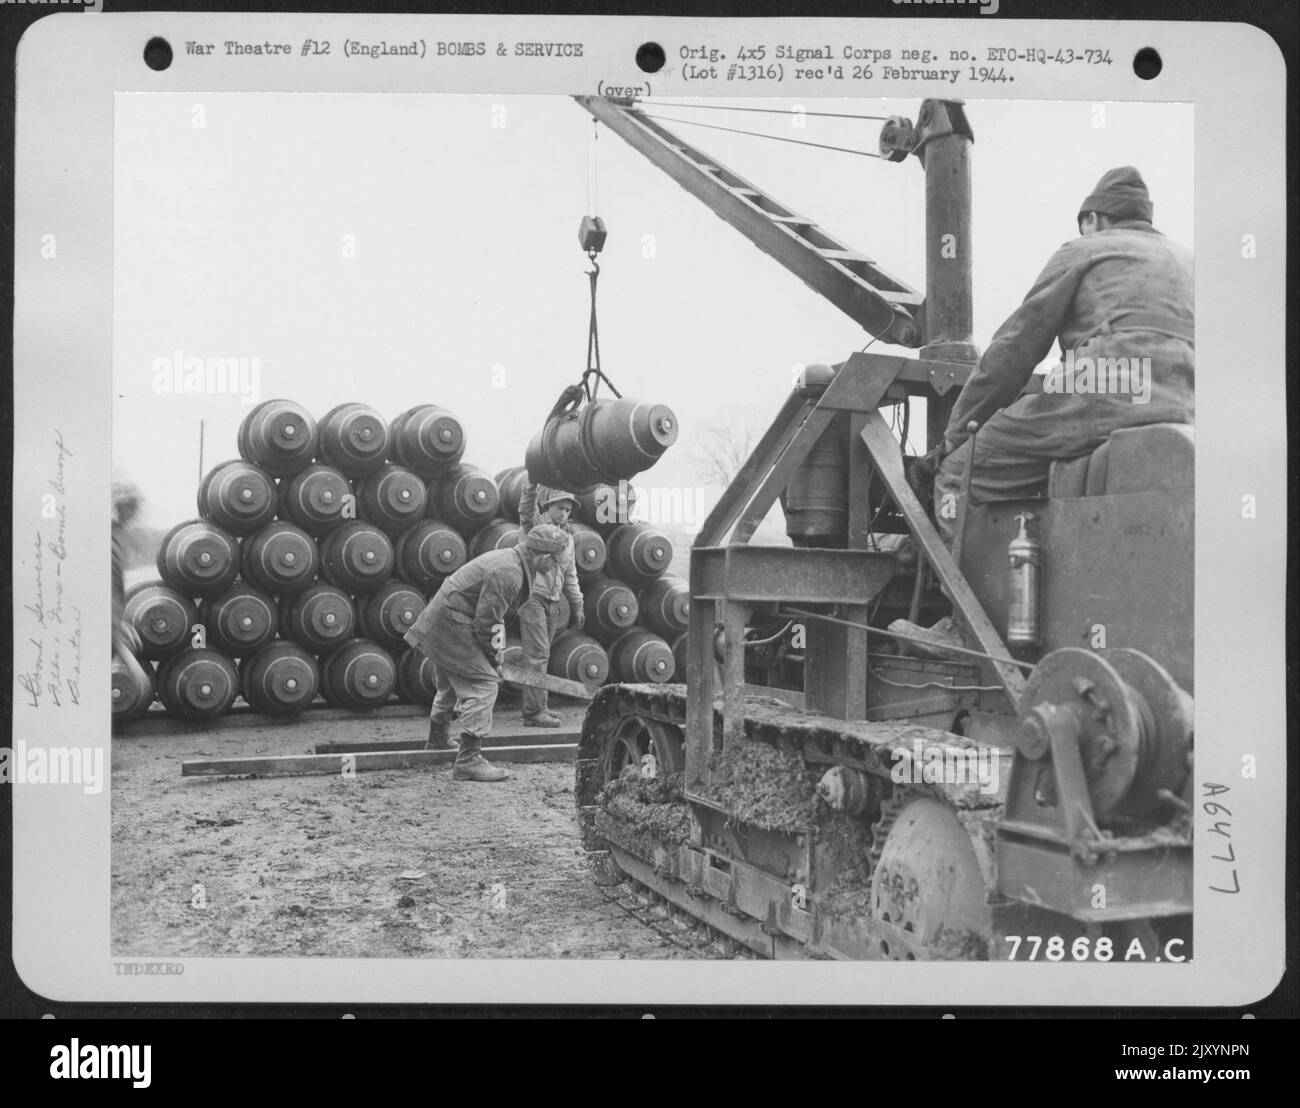 U.S. Bombs Being Piled Up Sharnbrook, England Prior To Being Camouflaged. 22 January 1943. Stock Photo